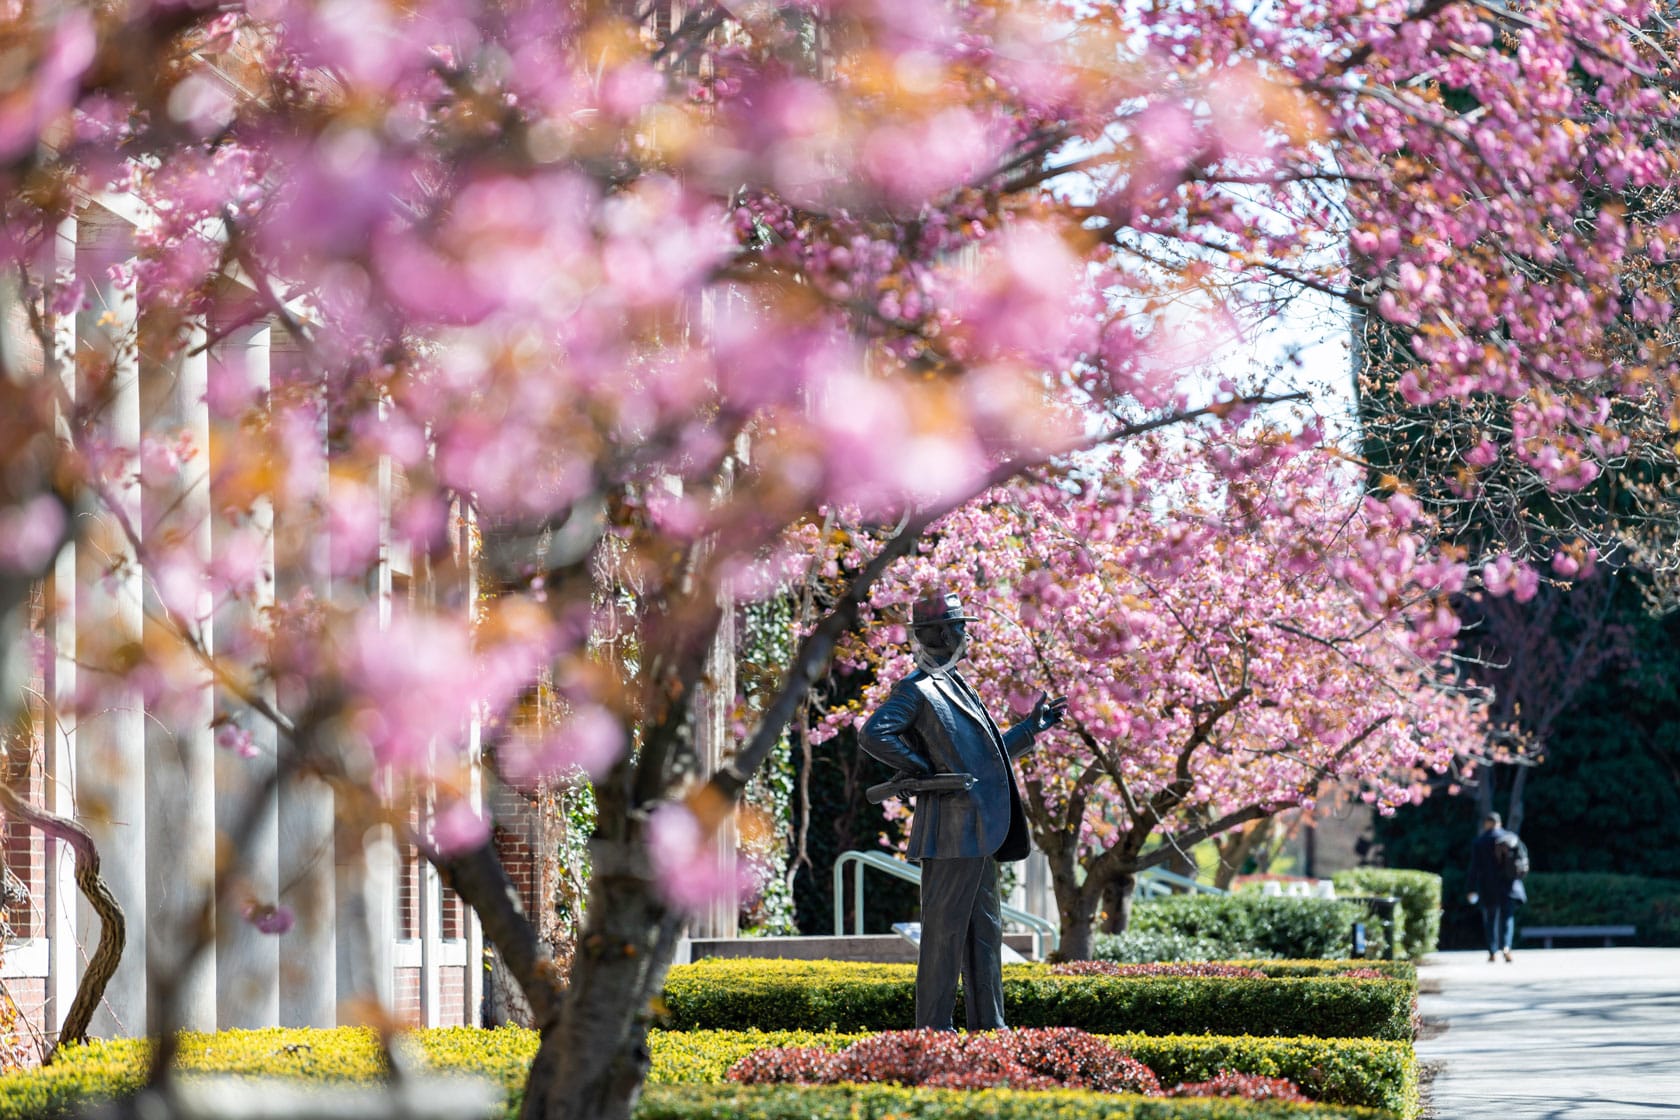 The George Eastman statue is seen through flowering trees on Eastman Quad April 26, 2021. // photo by J. Adam Fenster / University of Rochester